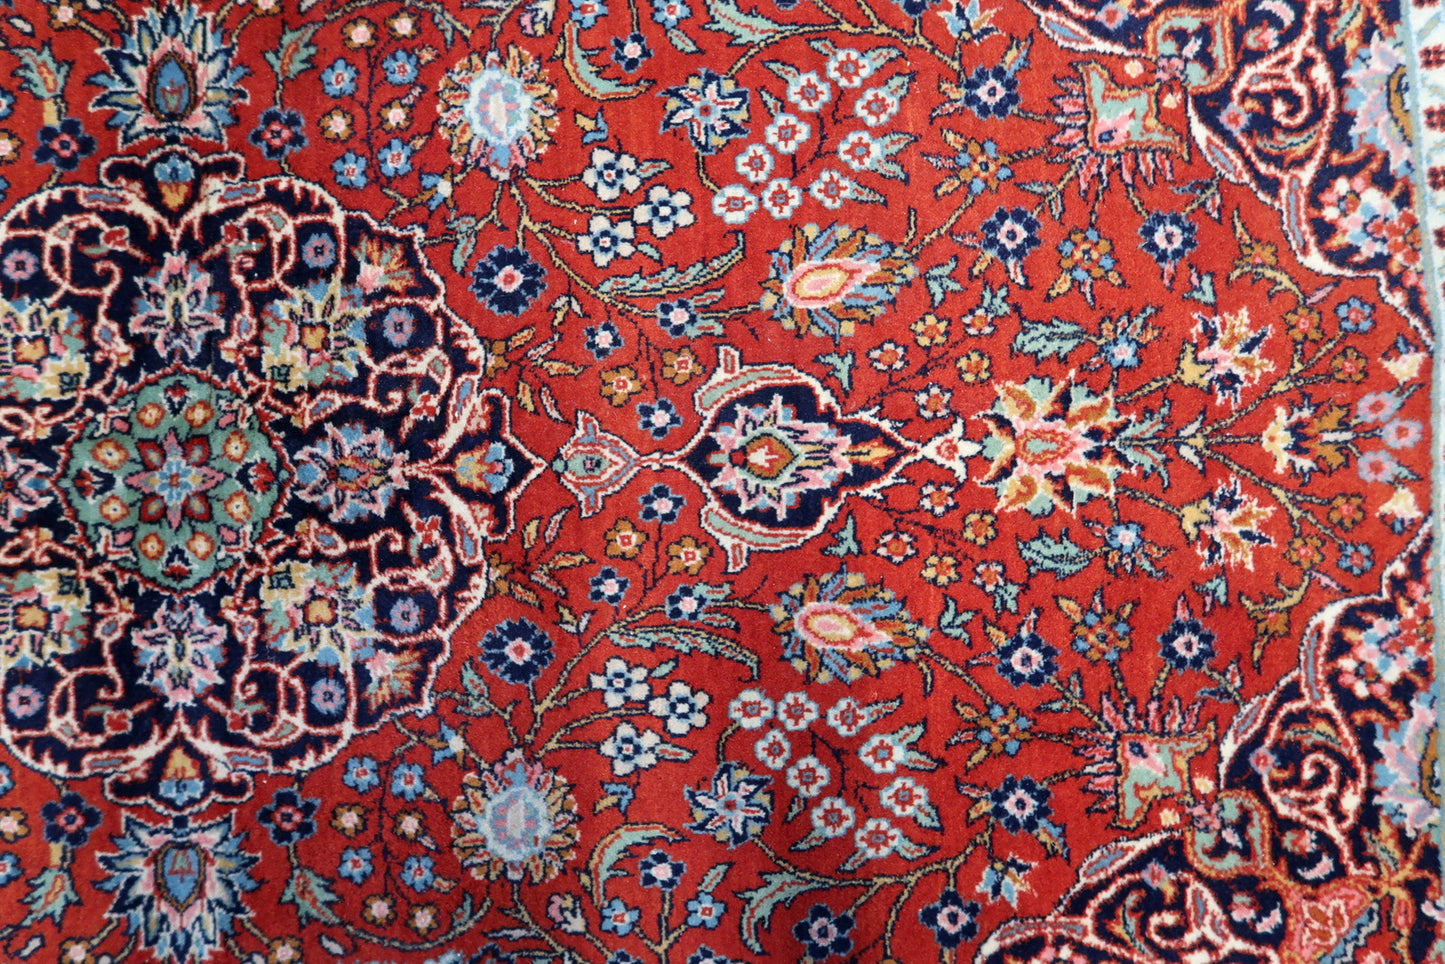 Close-up of the red background with floral motifs on the handmade antique Persian Kashan rug.